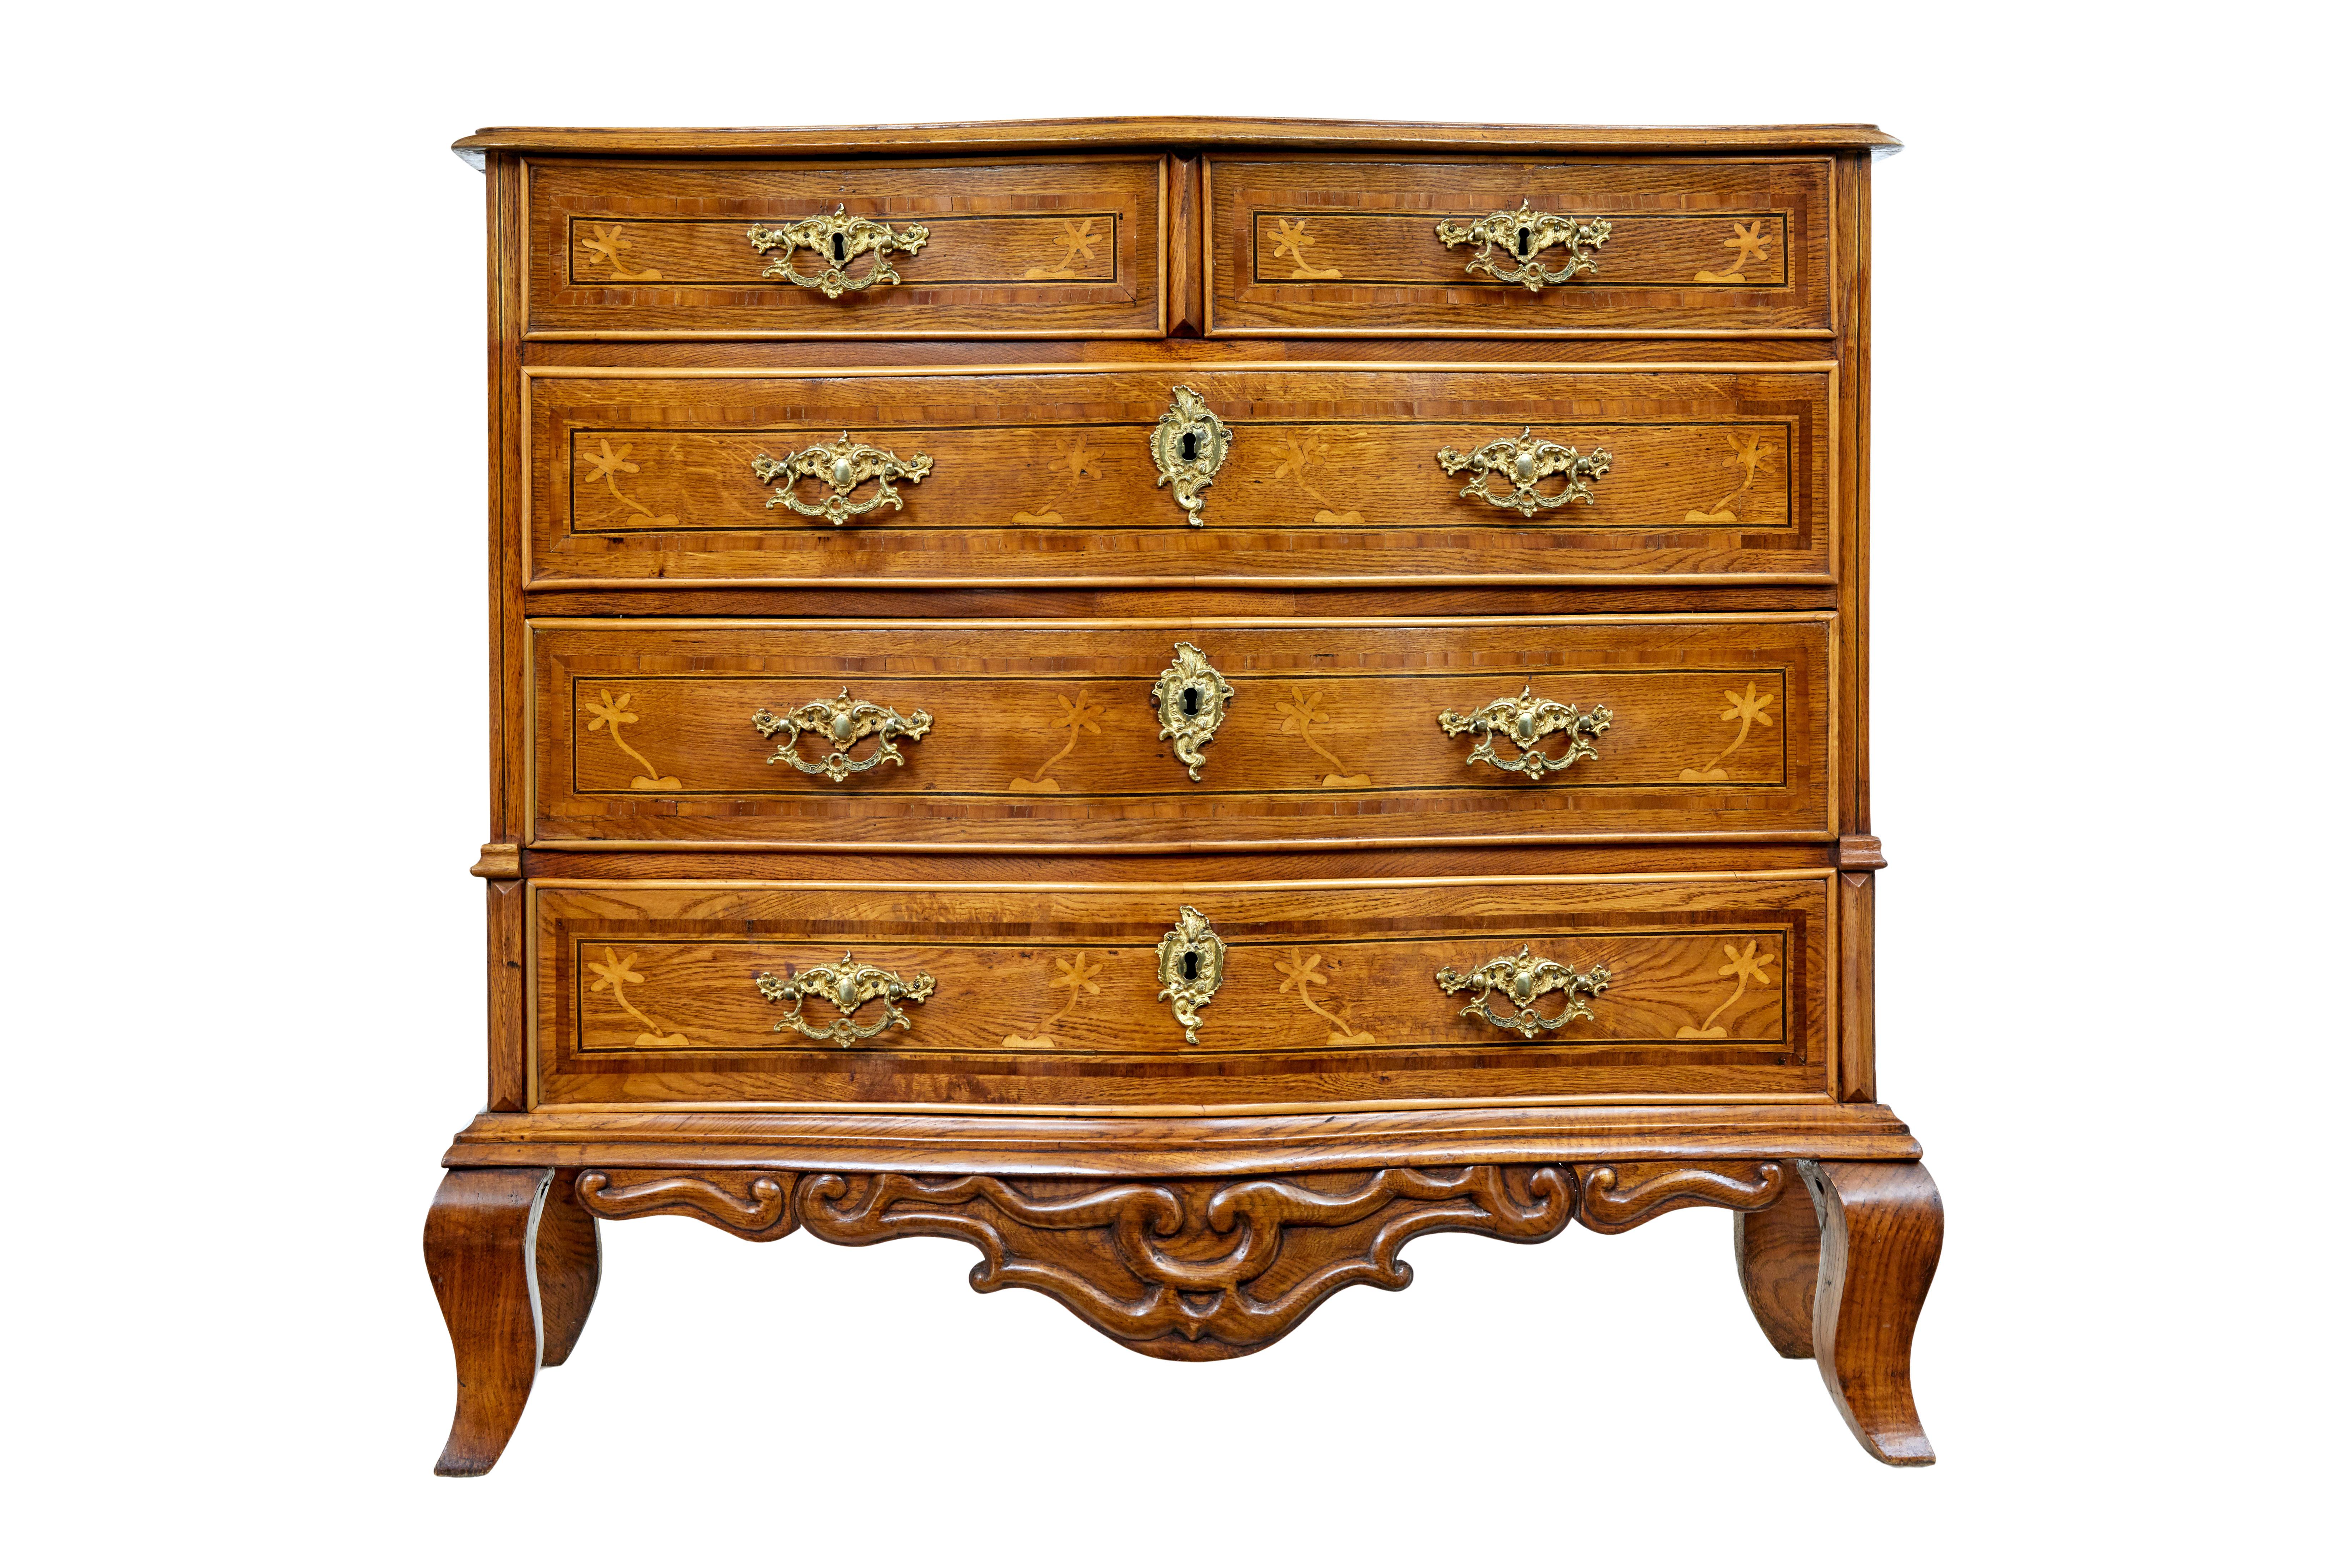 Early 19th century Swedish oak inlaid chest of drawers, circa 1800.

Rare Swedish period commode with a serpentine shaped front. Fitted with 5 drawers in a 2 over 3 format, each drawer with cock beaded edges, inlaid with walnut and satinwood and